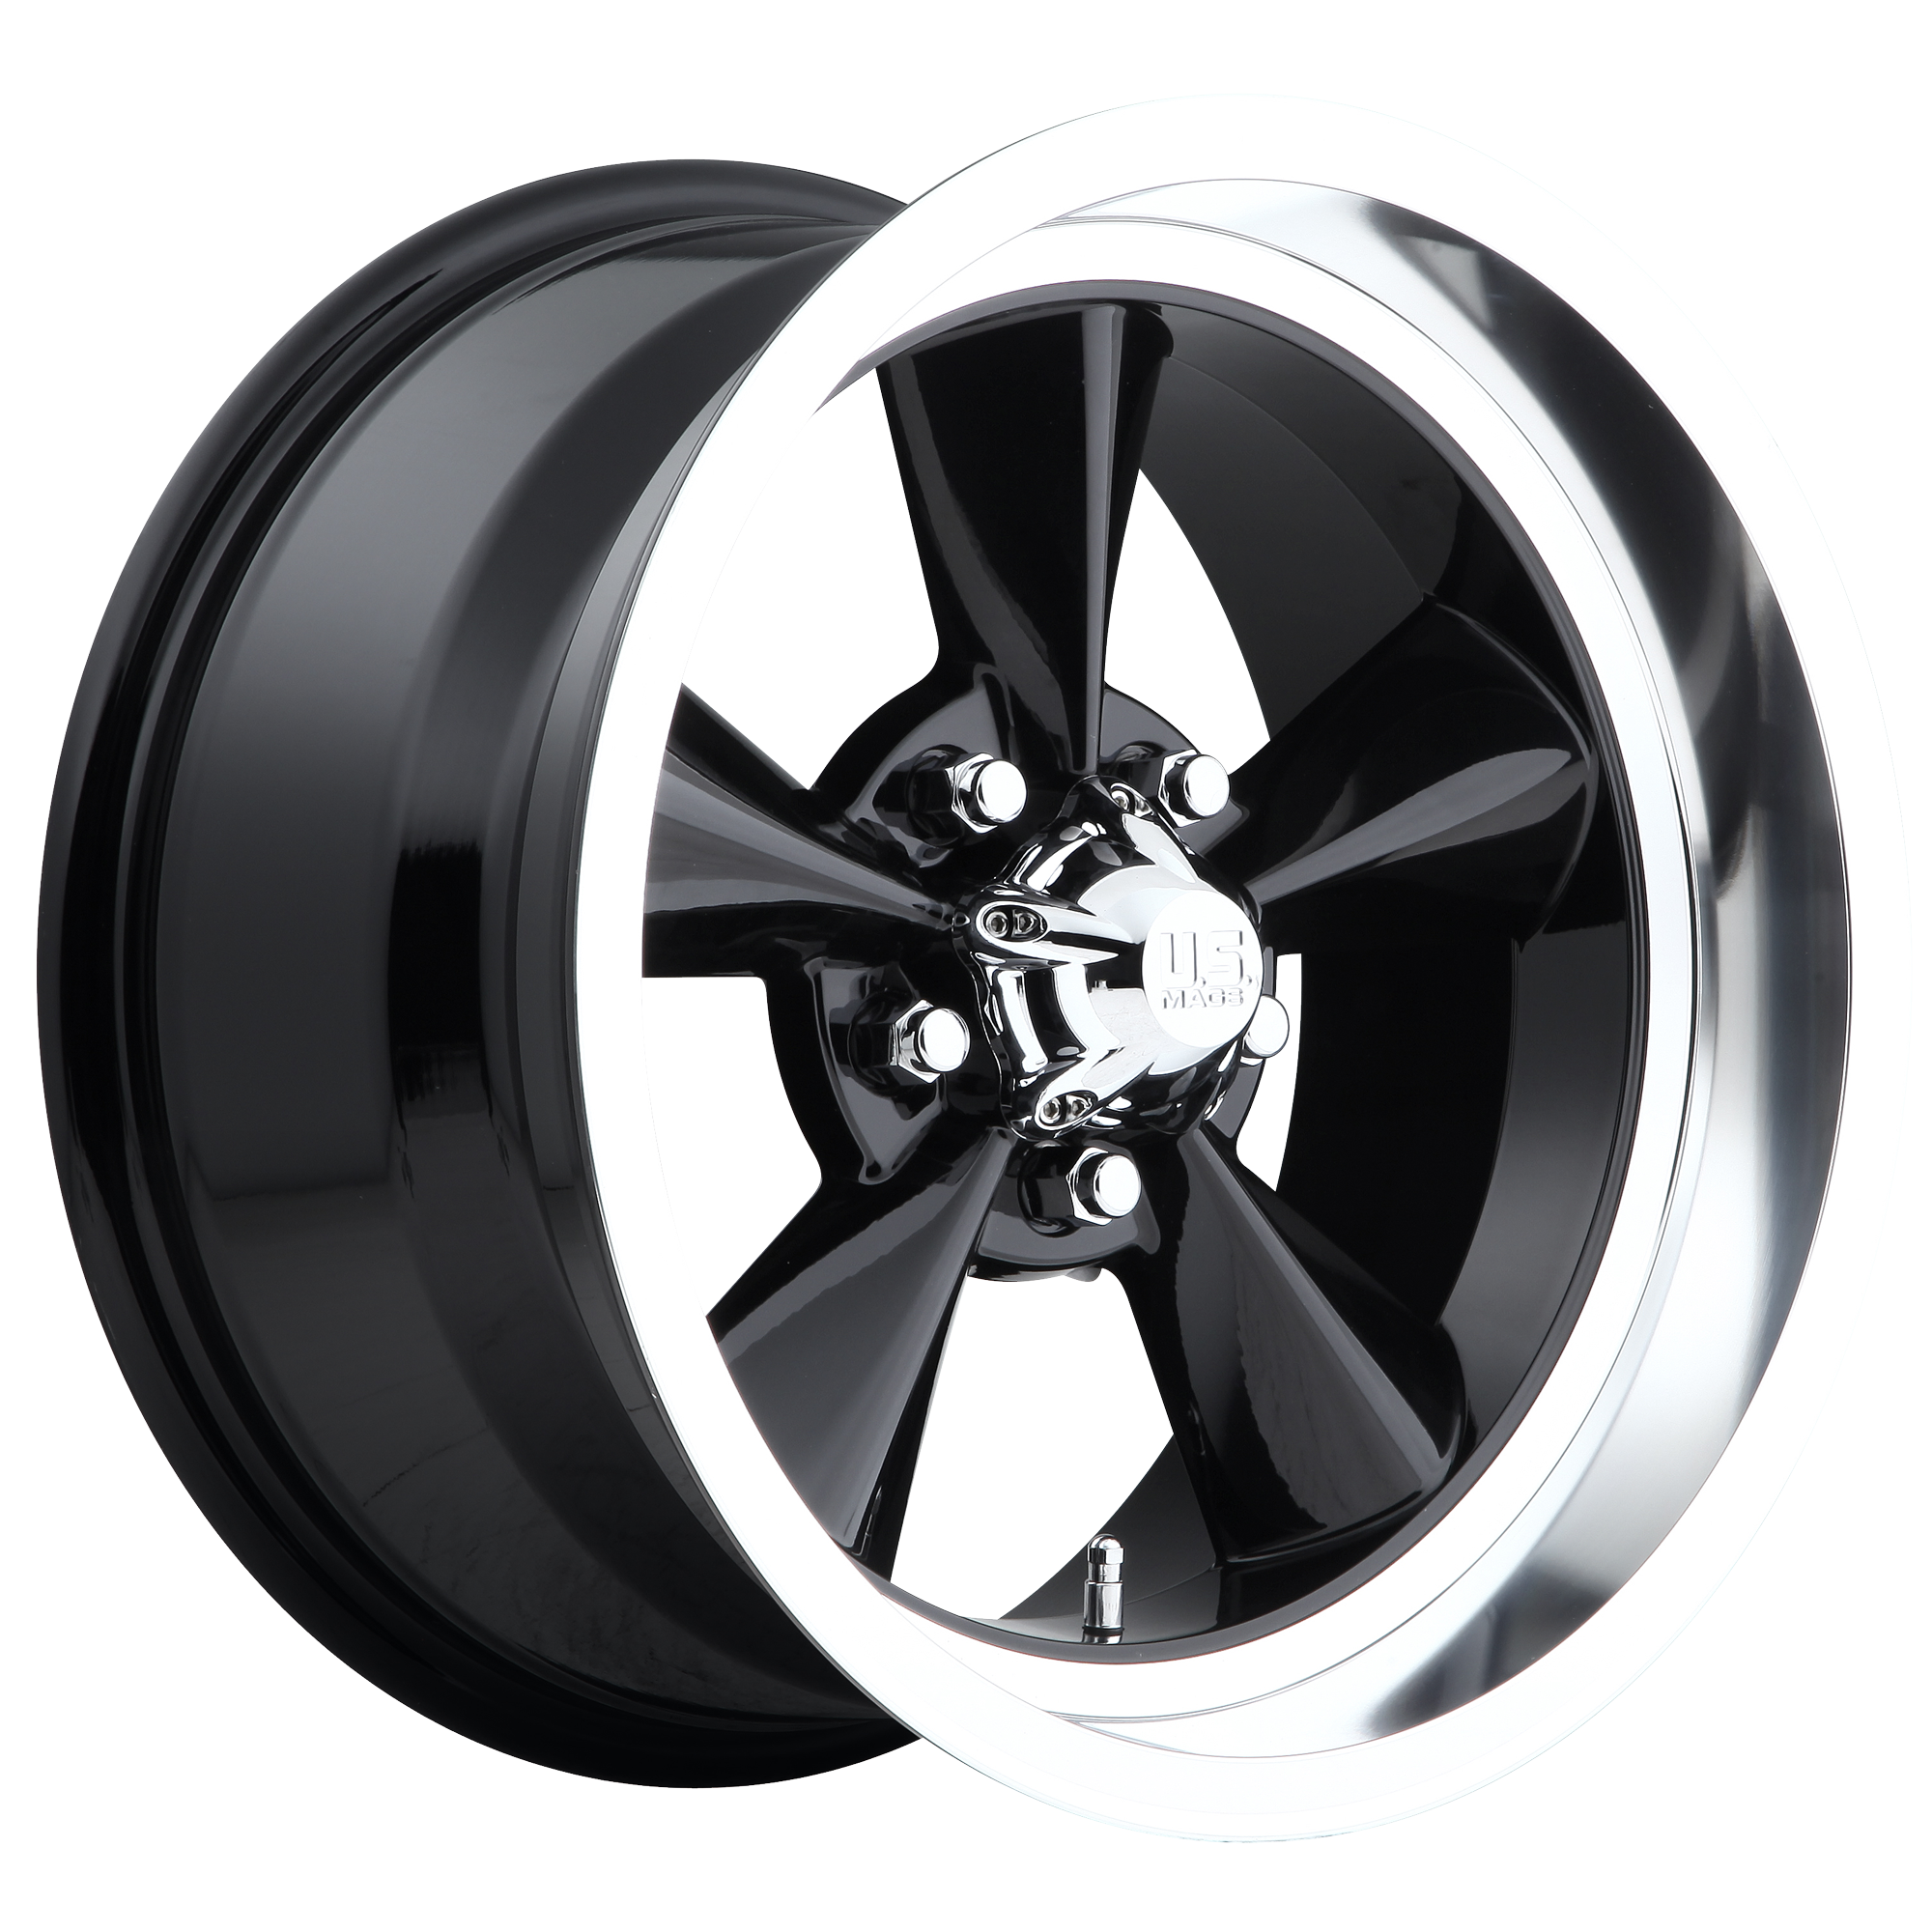 STANDARD 18x9 5x120.65 GLOSS BLACK (7 mm) - Tires and Engine Performance